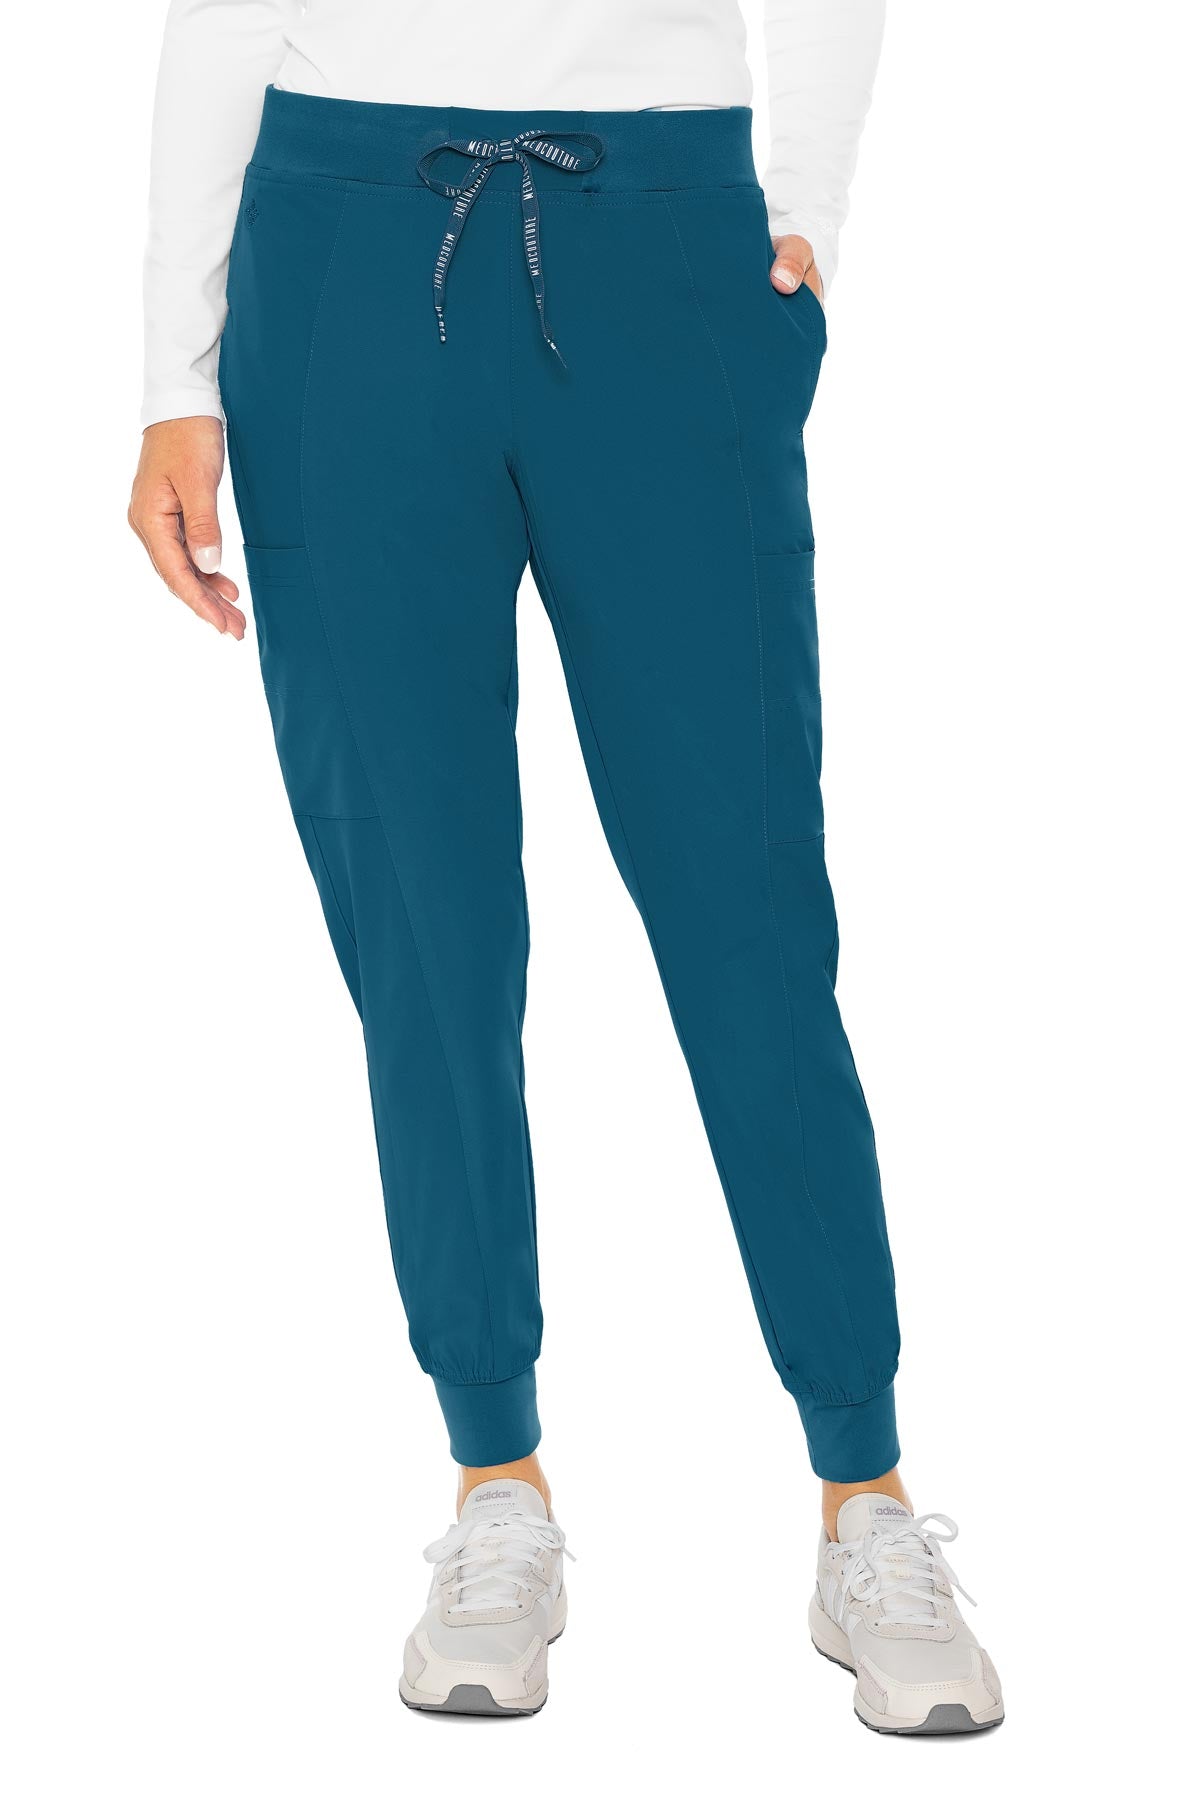 Med Couture Peaches Seamed Jogger Regular Length (XS-3XL)